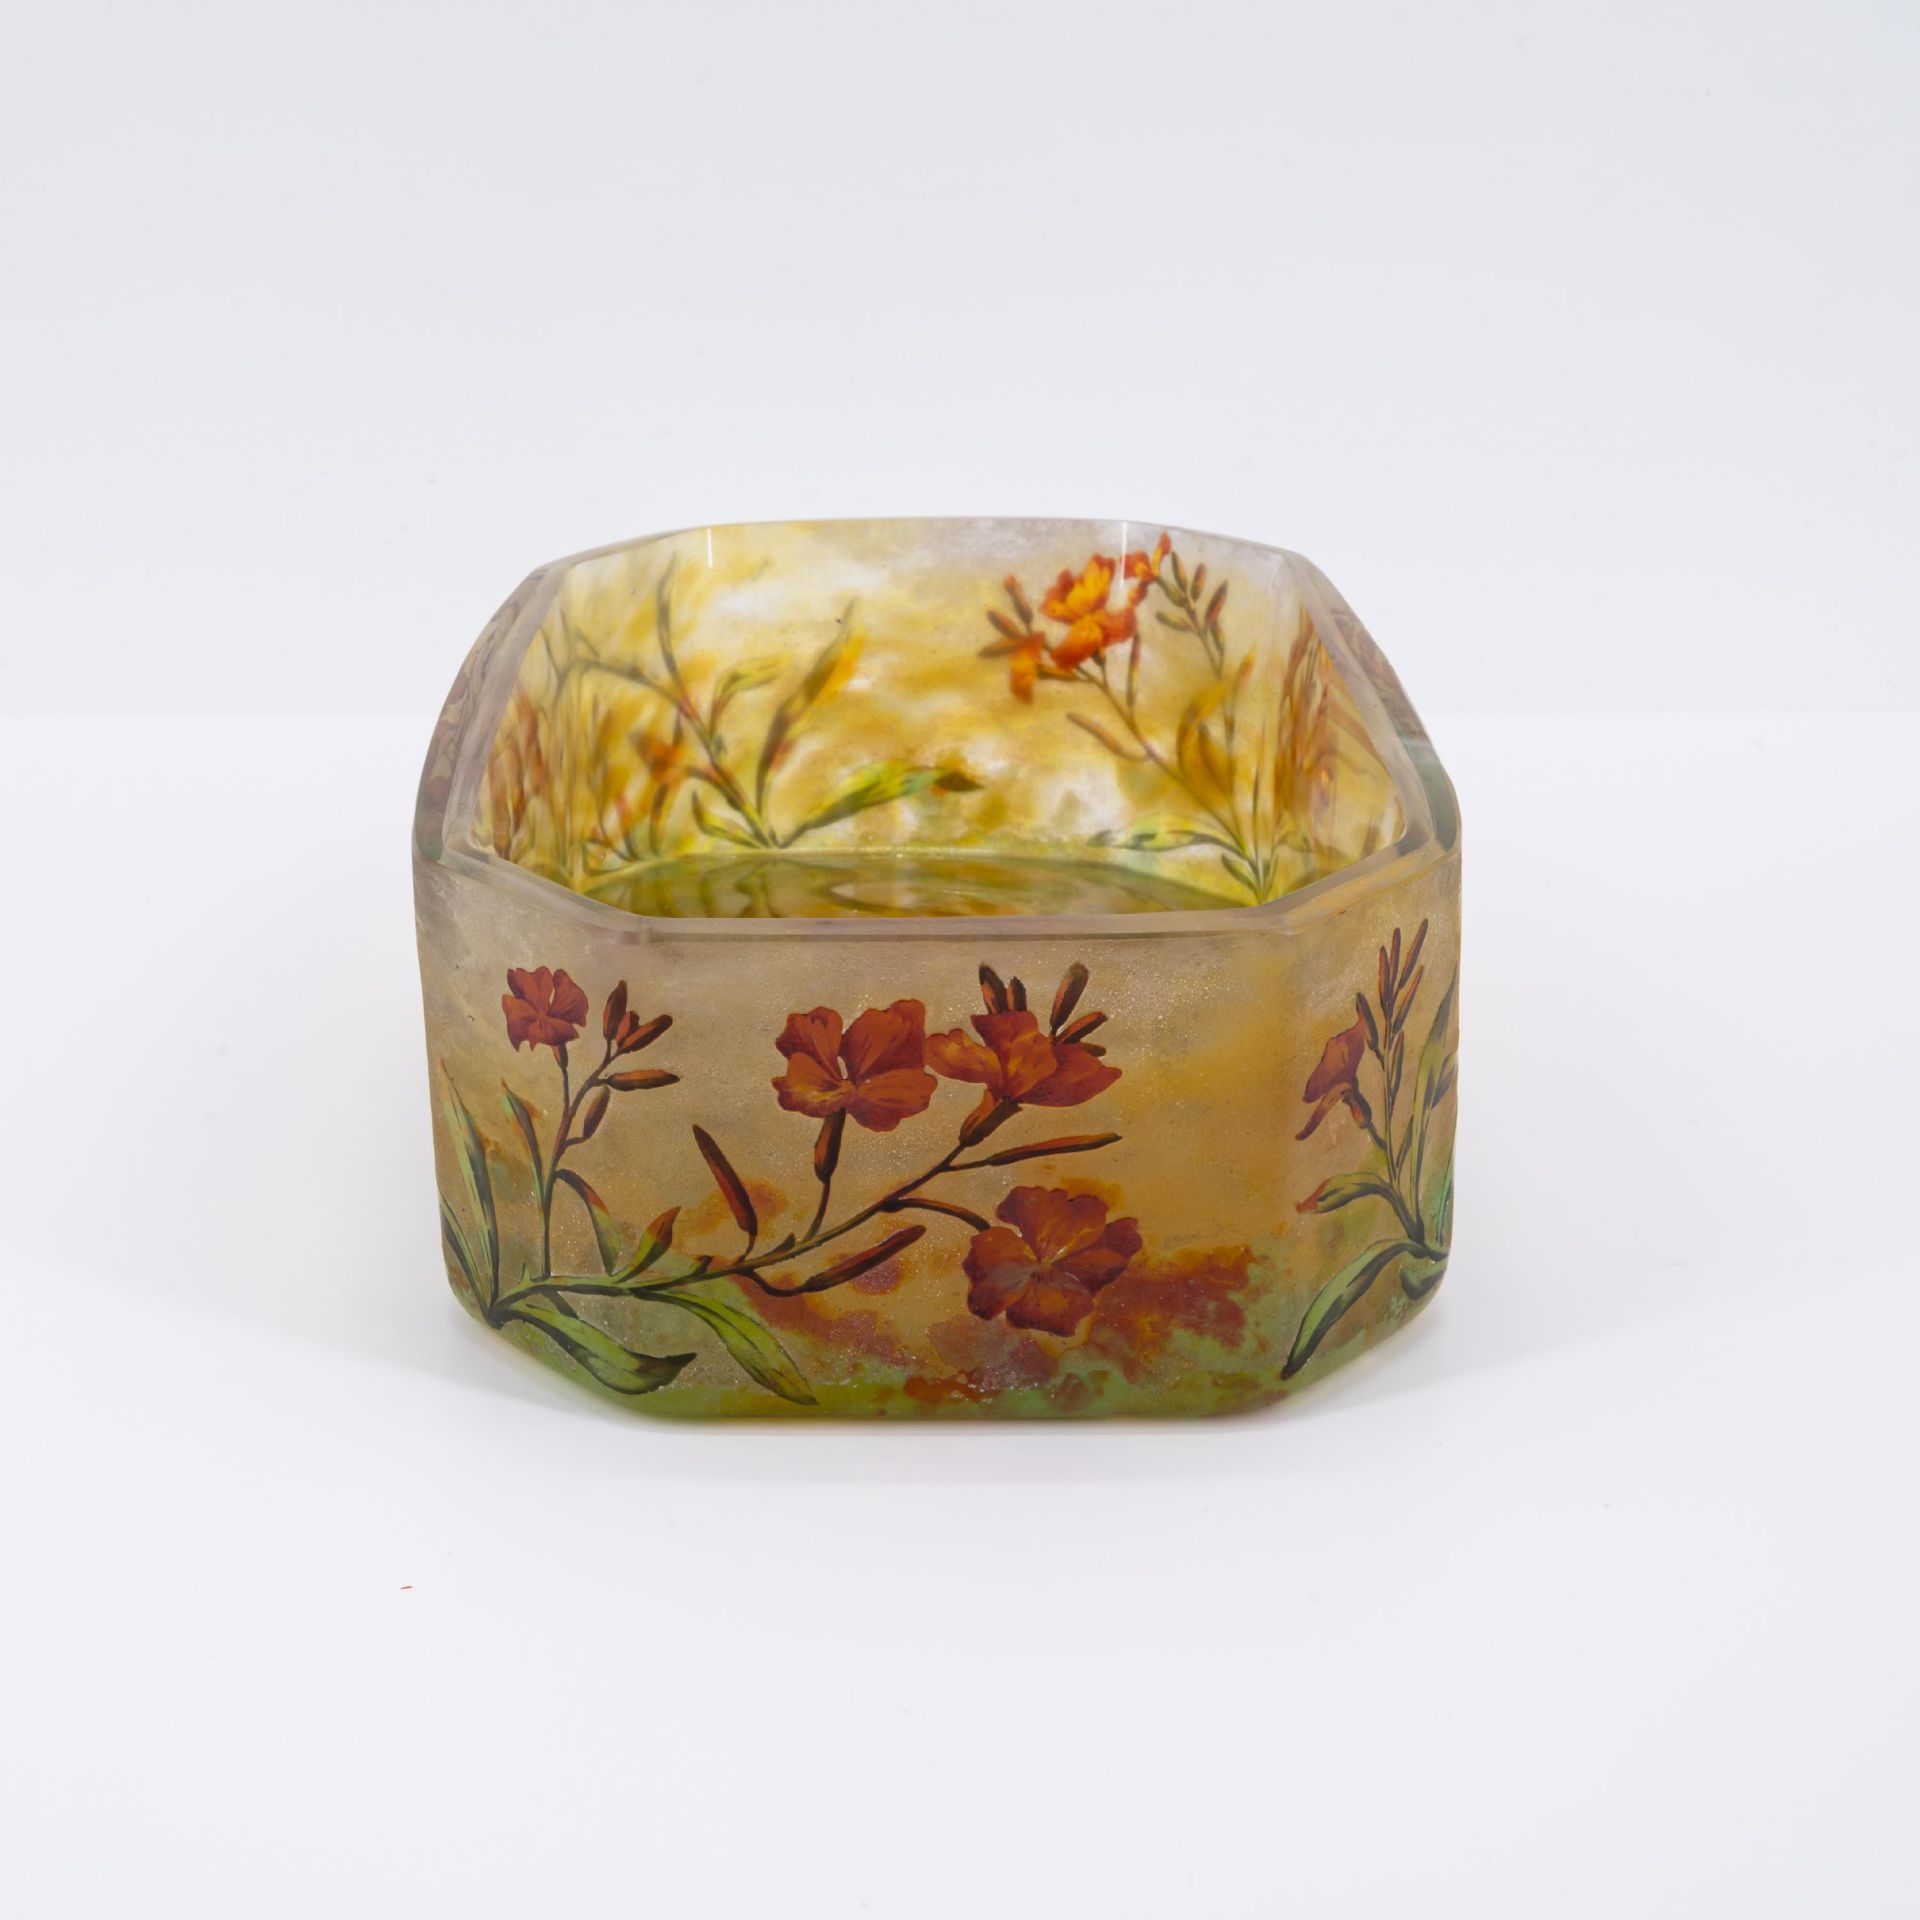 GLASS JARDINIERE WITH FLORAL DECOR - Image 4 of 7